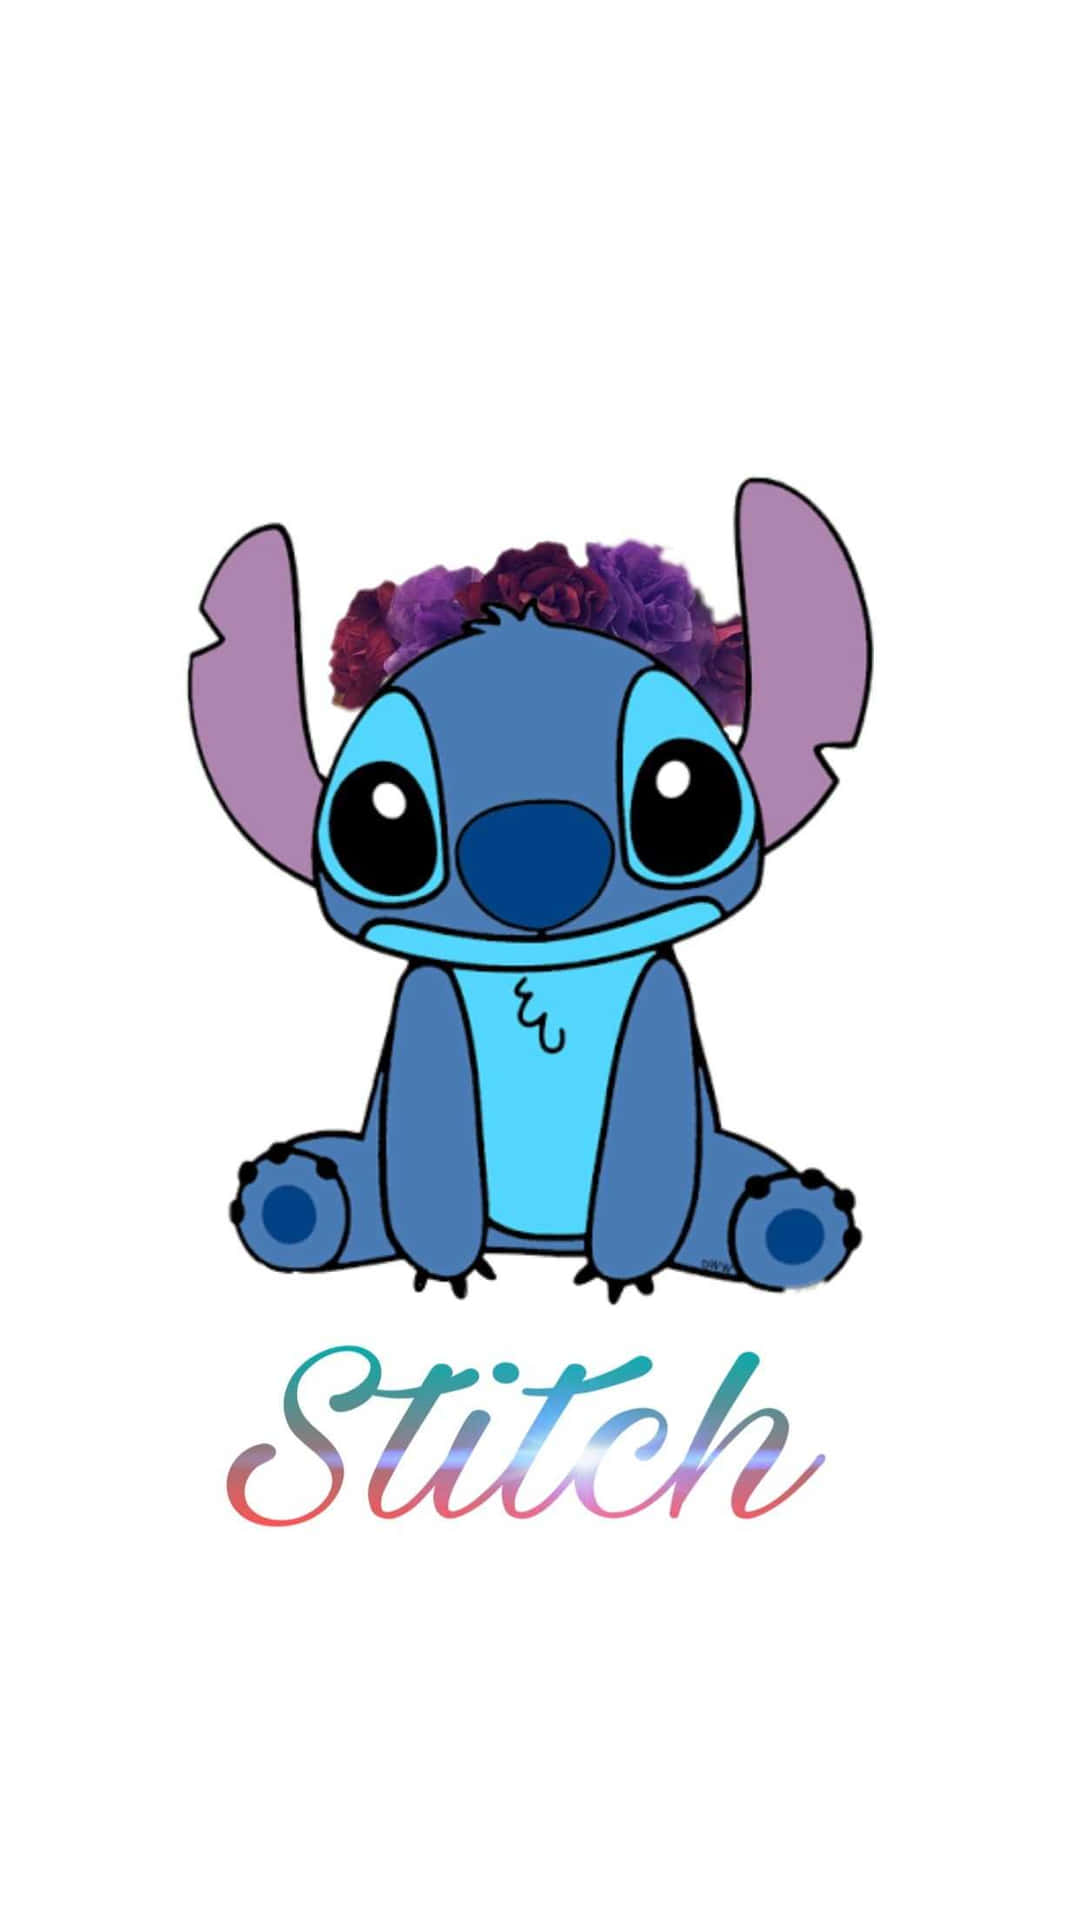 Greeting From Stitch